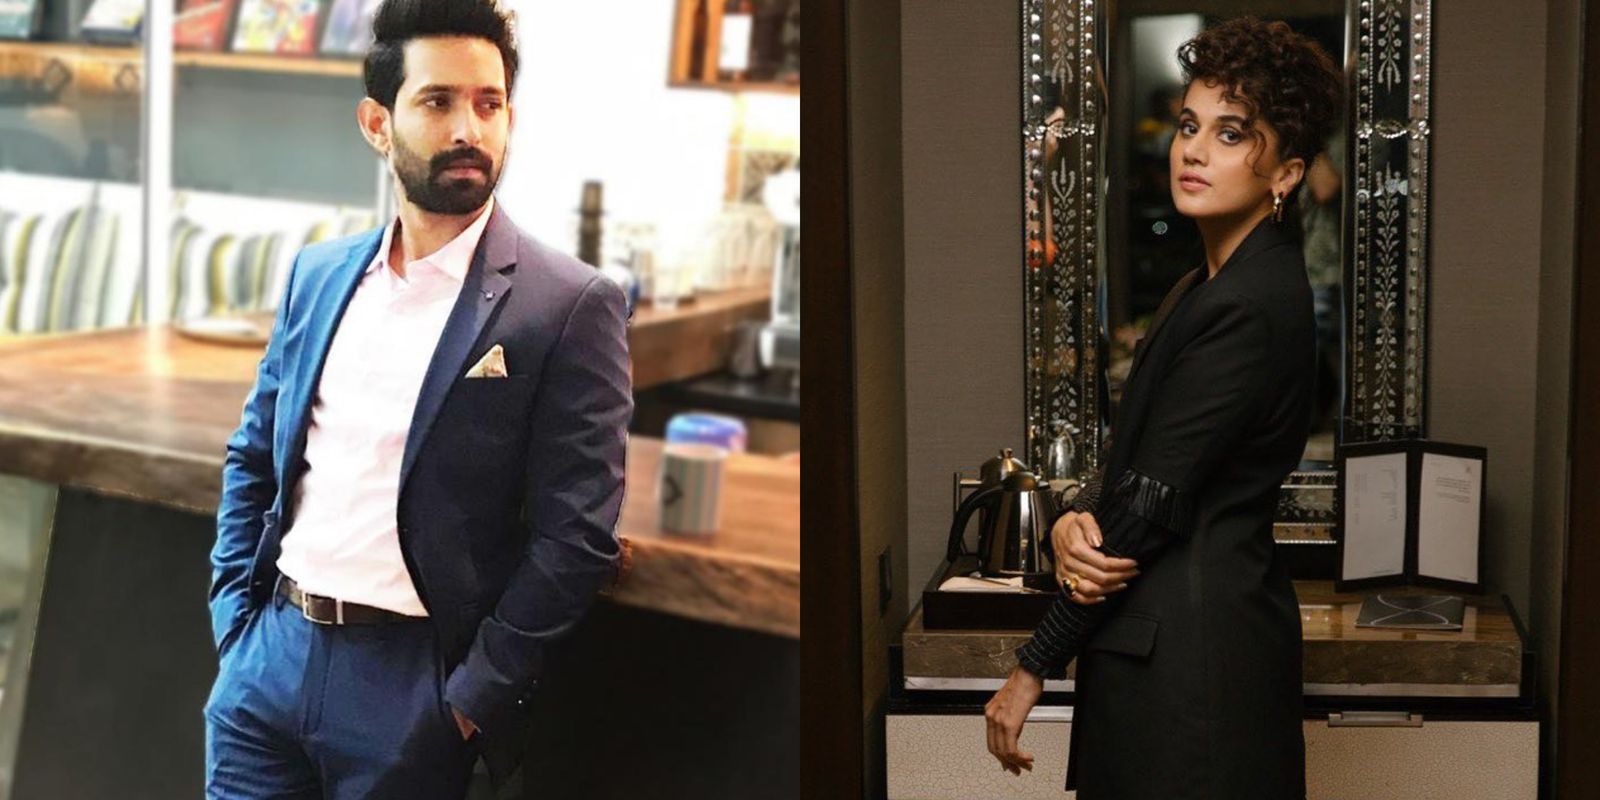 Taapsee Pannu And Vikrant Massey To Star In Anand L. Rai's Murder Mystery Titled Haseen Dillruba